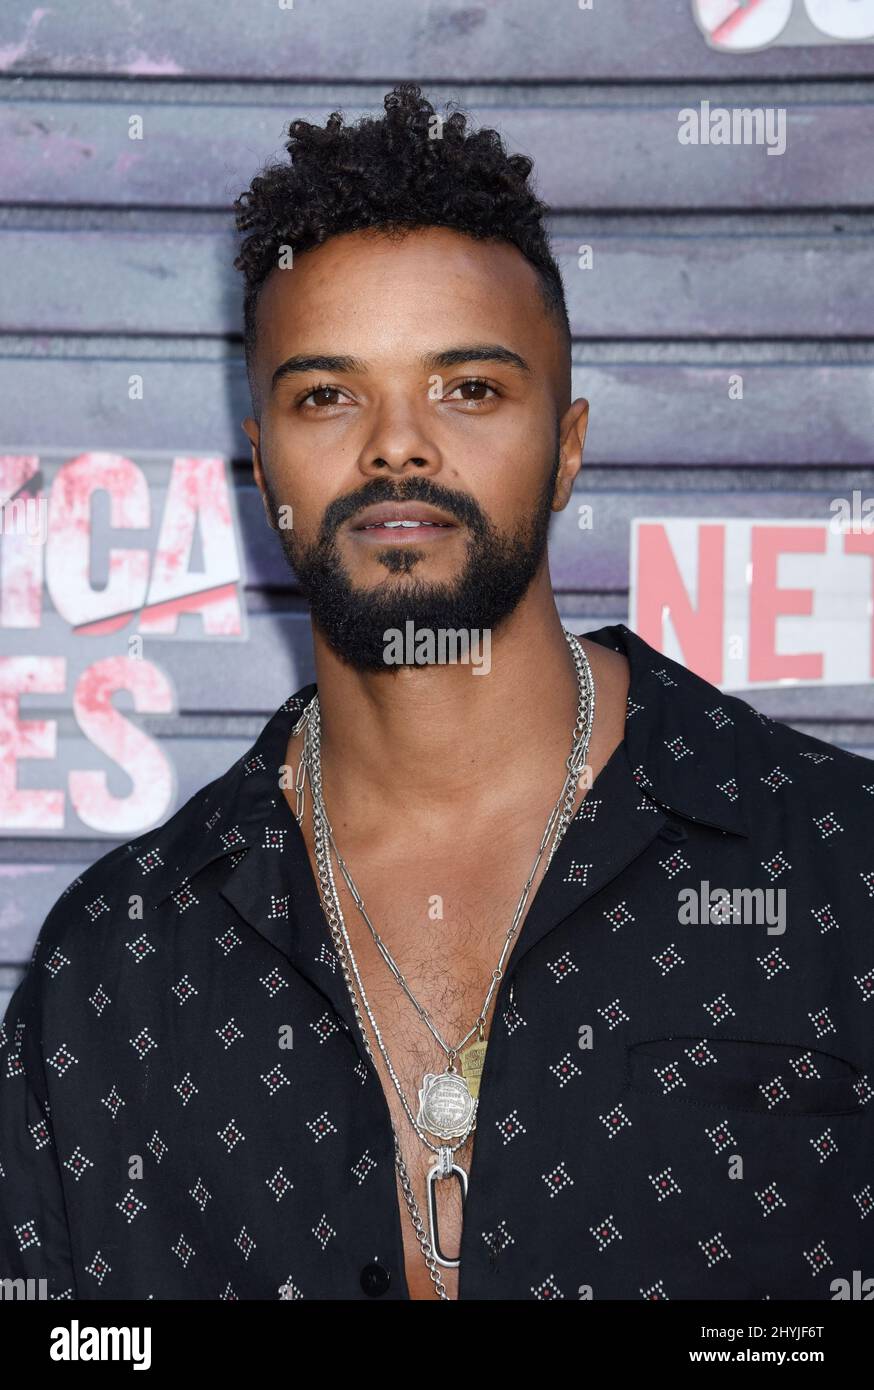 Eka Darville attending Marvel's 'Jessica Jones' Season 3 Special Screening held at the ArcLight Cinemas Hollywood on May 28, 2019 in Hollywood Stock Photo